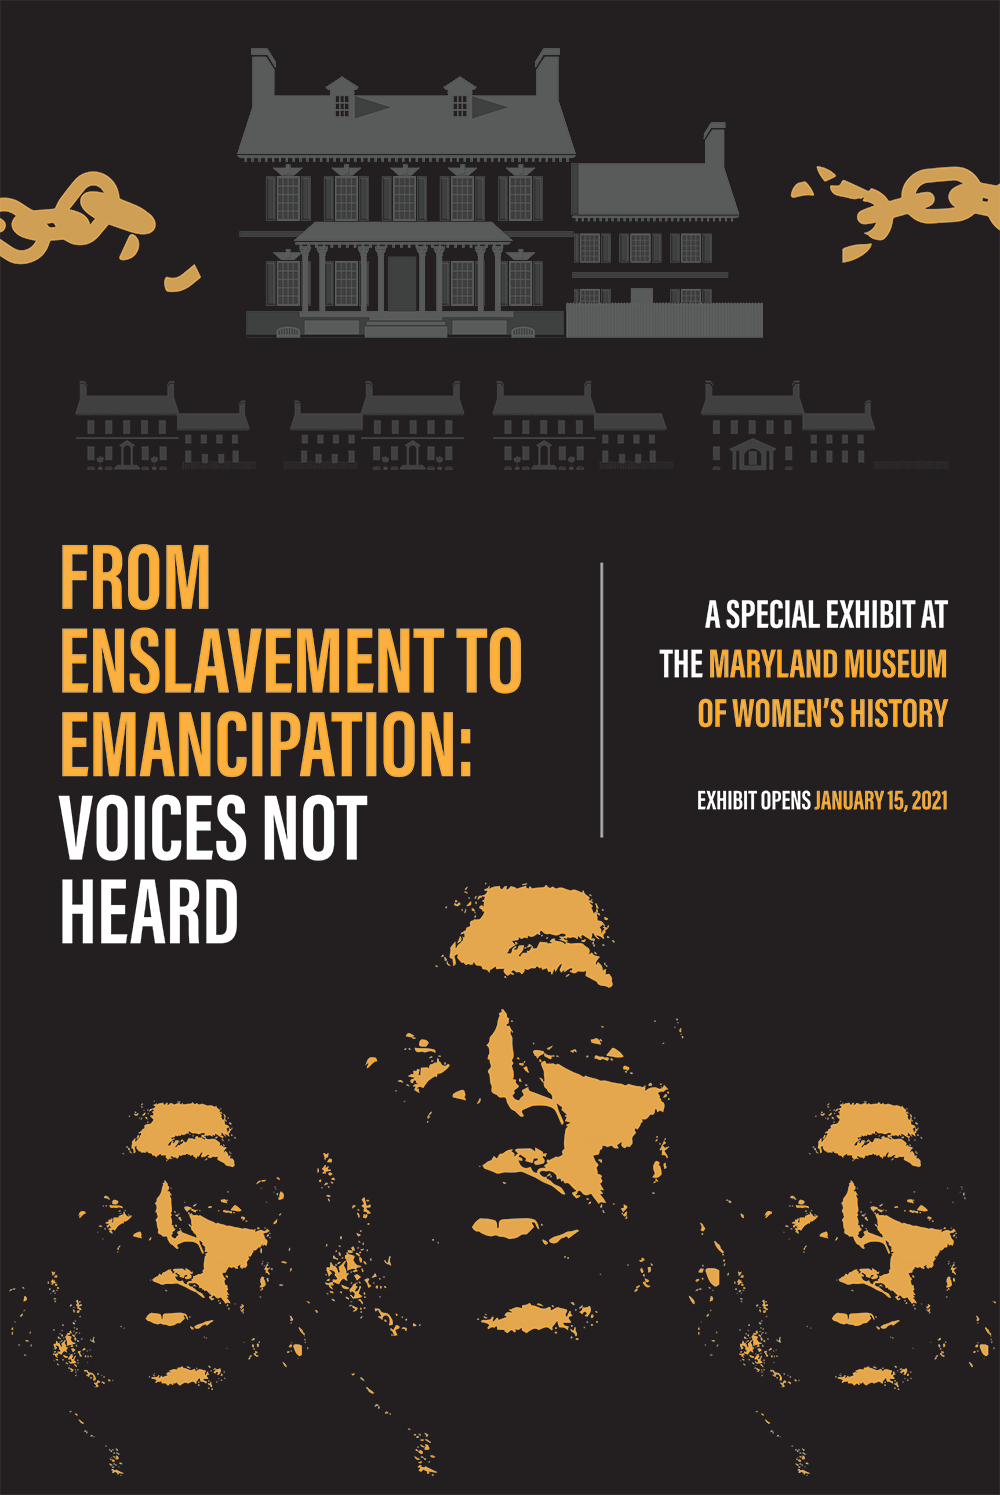 From Enslavement to Emancipation: Voice Not Heard